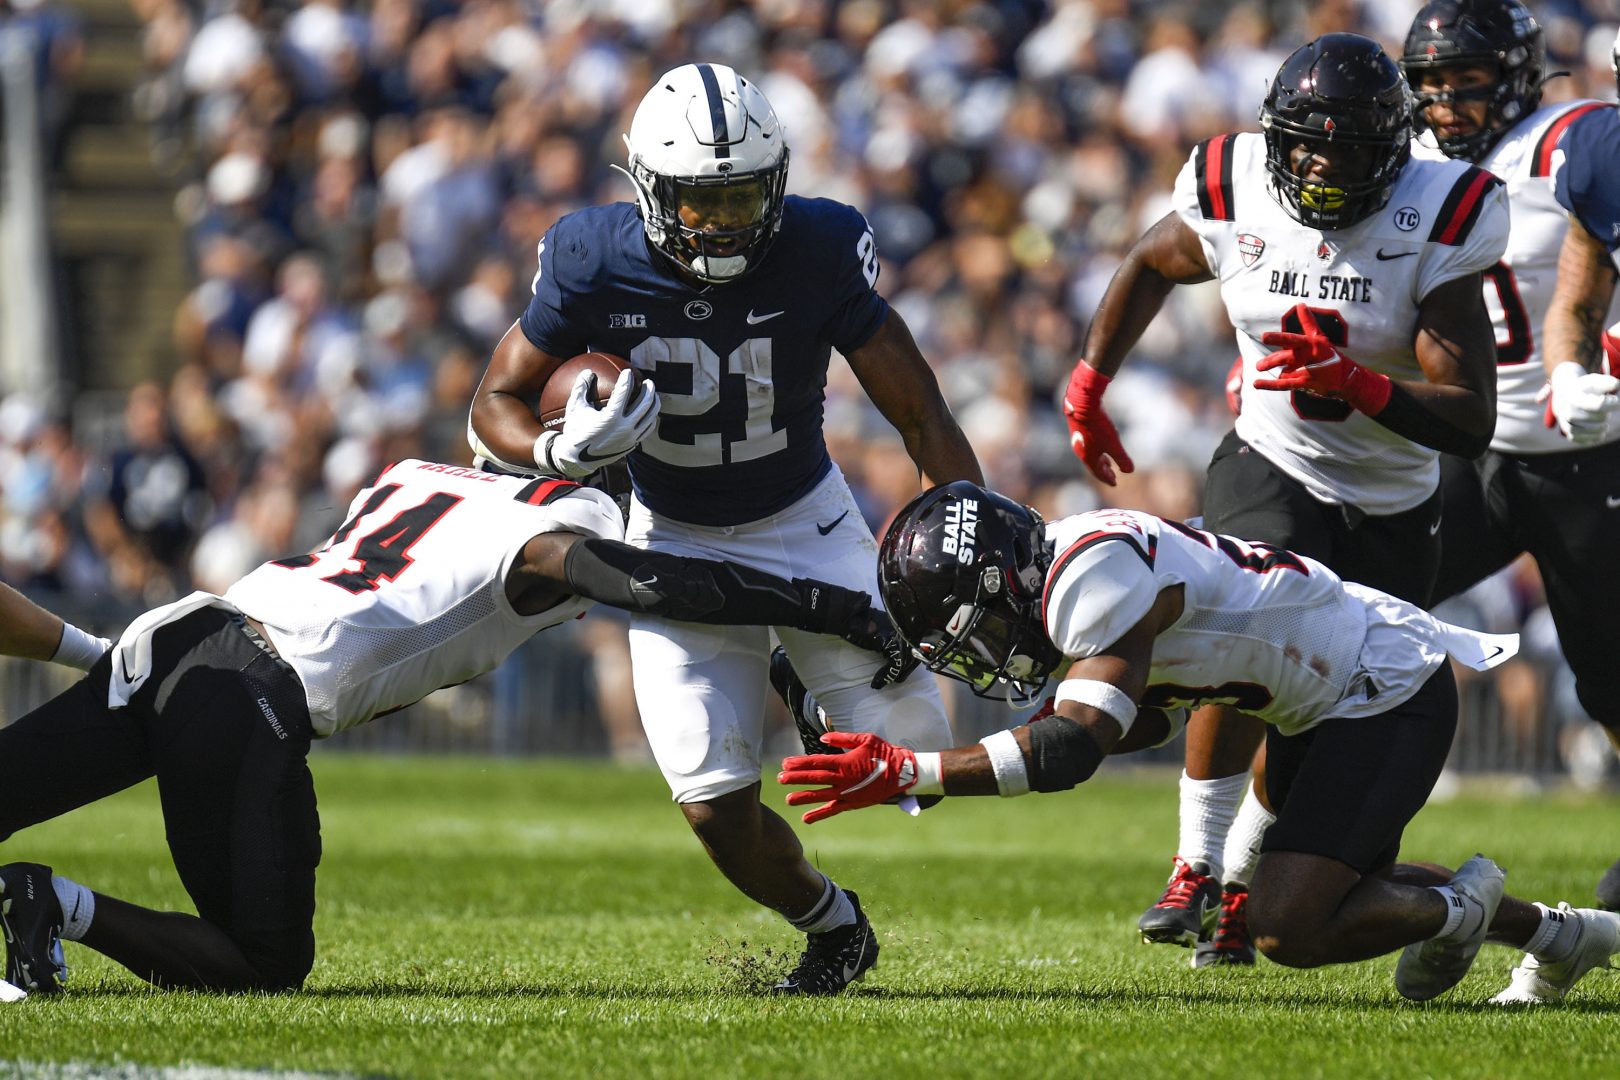 Penn State running back Noah Cain (21) splits two Ball State defenders on a first half run during an NCAA college football game in State College, Pa., on Saturday, Sept. 11, 2021. 